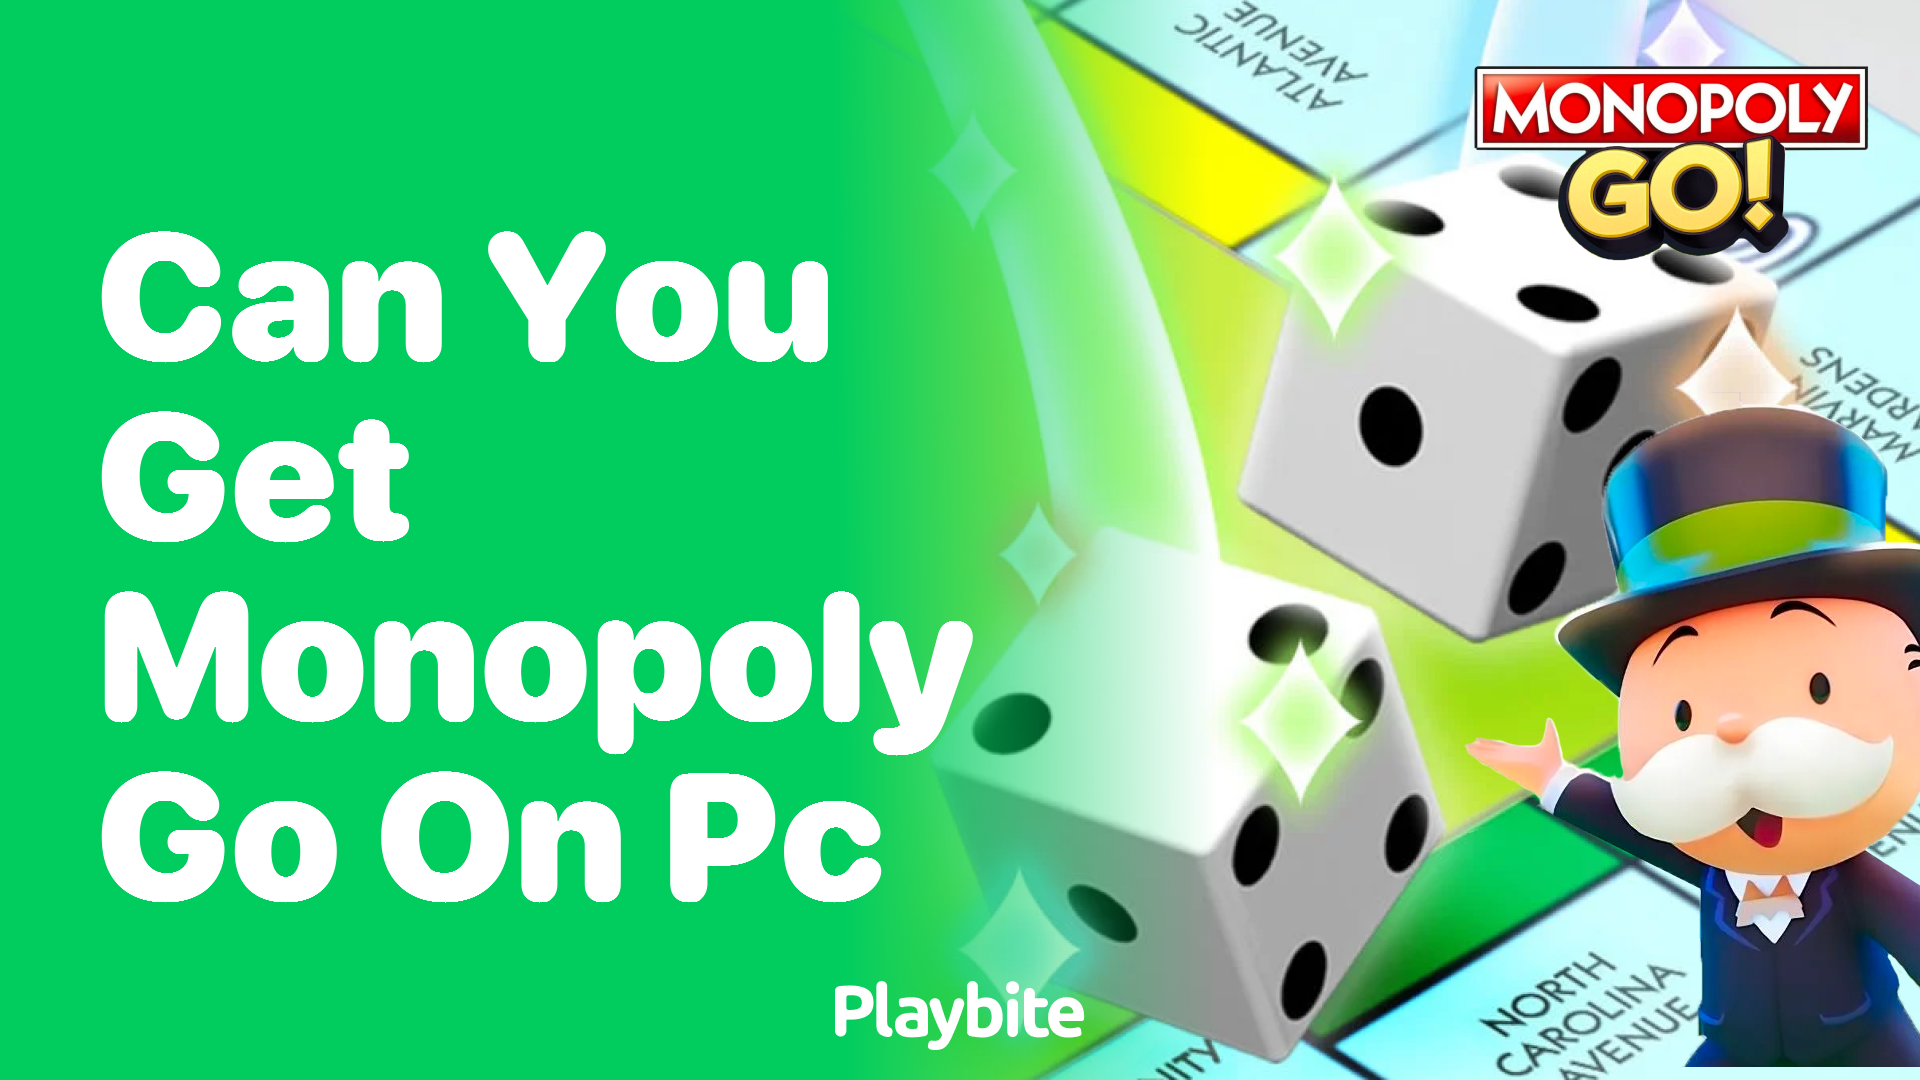 Can You Get Monopoly Go on PC? Find Out Here!